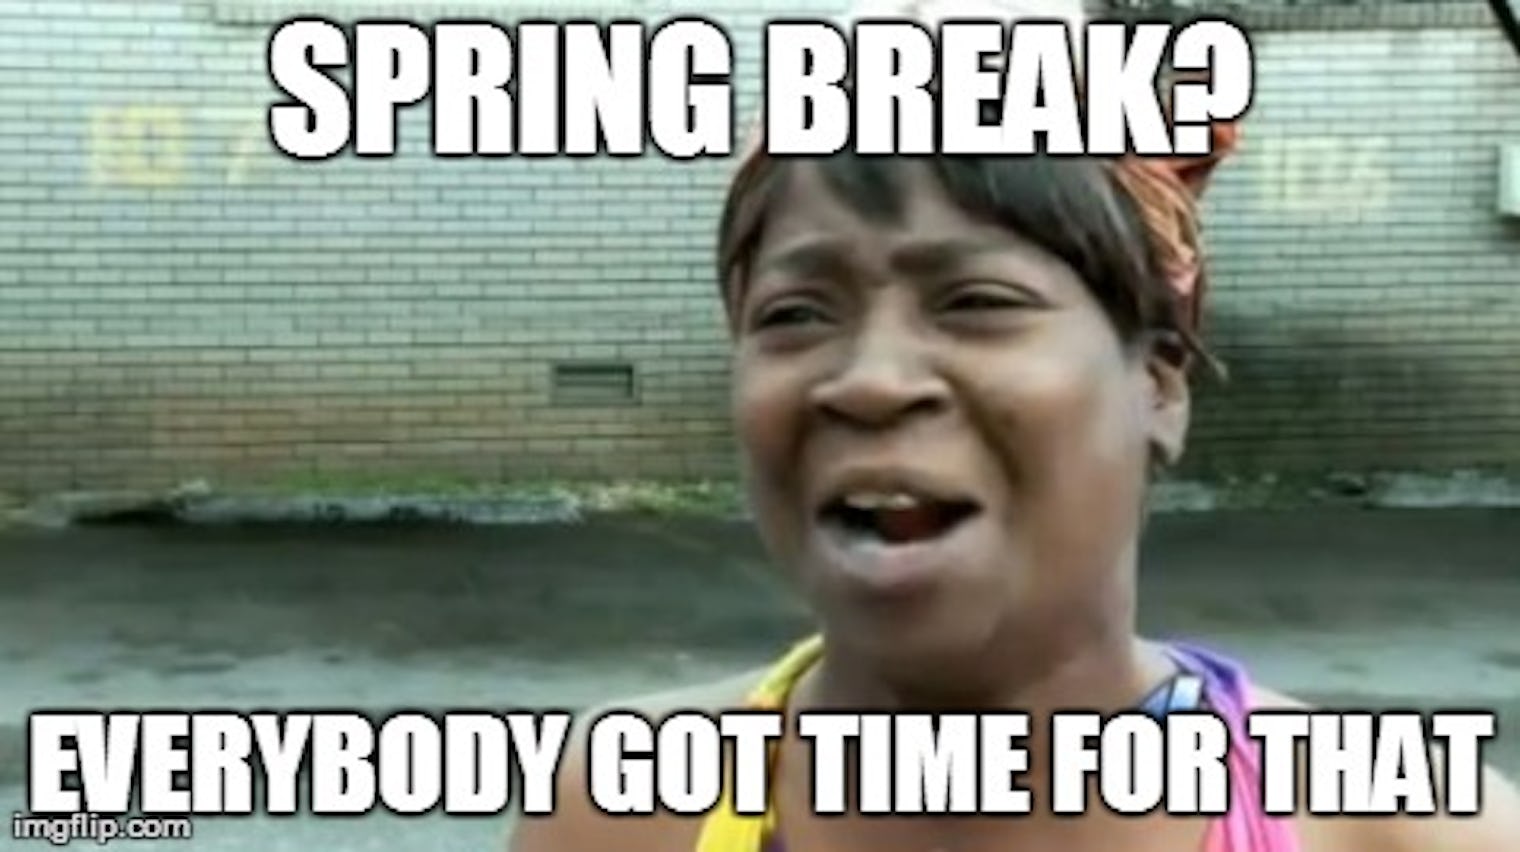 18 Spring Break Memes For Those Who Get Time Off, And Those Who Wish